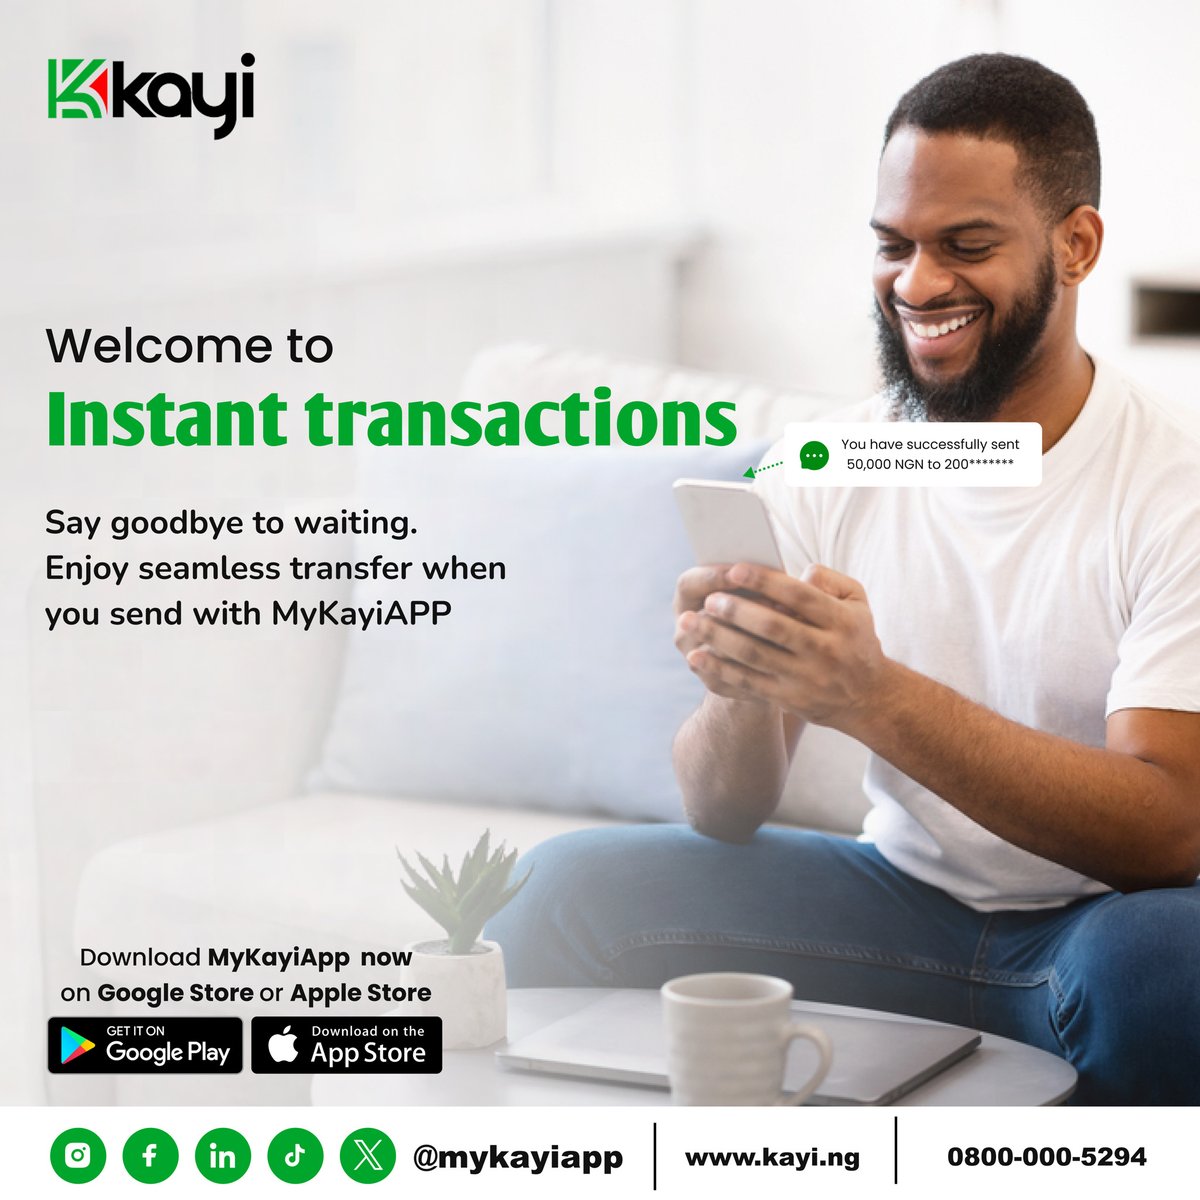 Hello millennials sending money has never been quicker!  With Kayiapp, transfer funds in a flash, making splitting bills or sending gifts a breeze. Say goodbye to waiting and hello to instant transactions!

#MoneyMadeEasy #MillennialFinance
#Mykayiapp
#Kayiway
#Digitalbanking